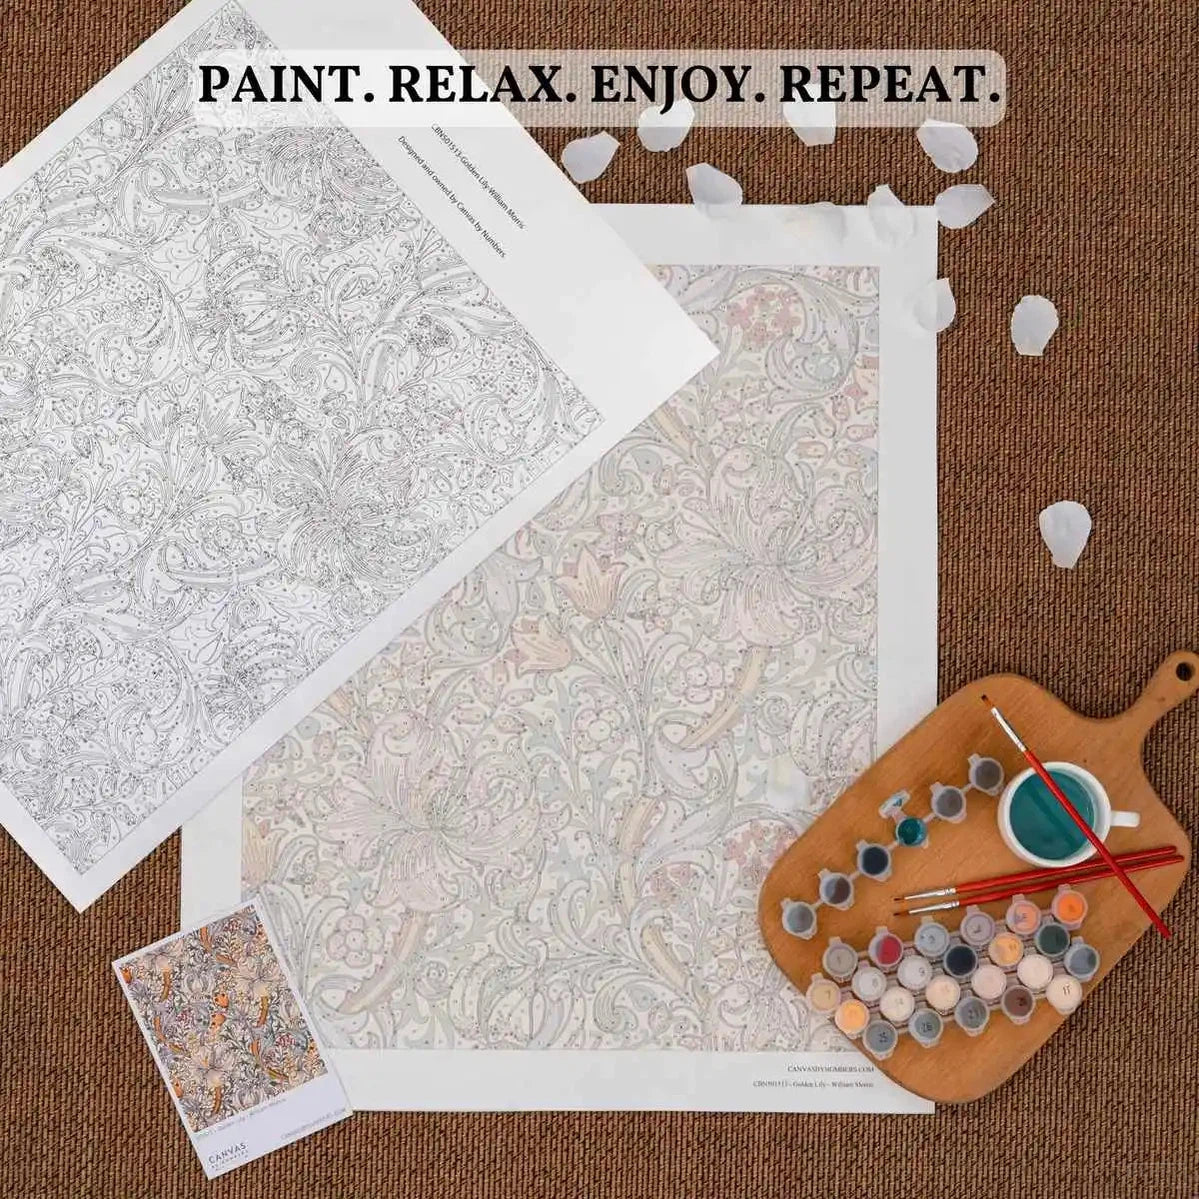 Orchidae - Paint by Numbers-A stunning floral paint by numbers artwork by zoologist Ernst Haeckel. Premium materials, hours of fun ahead! Are you ready for a creative experience?-Canvas by Numbers